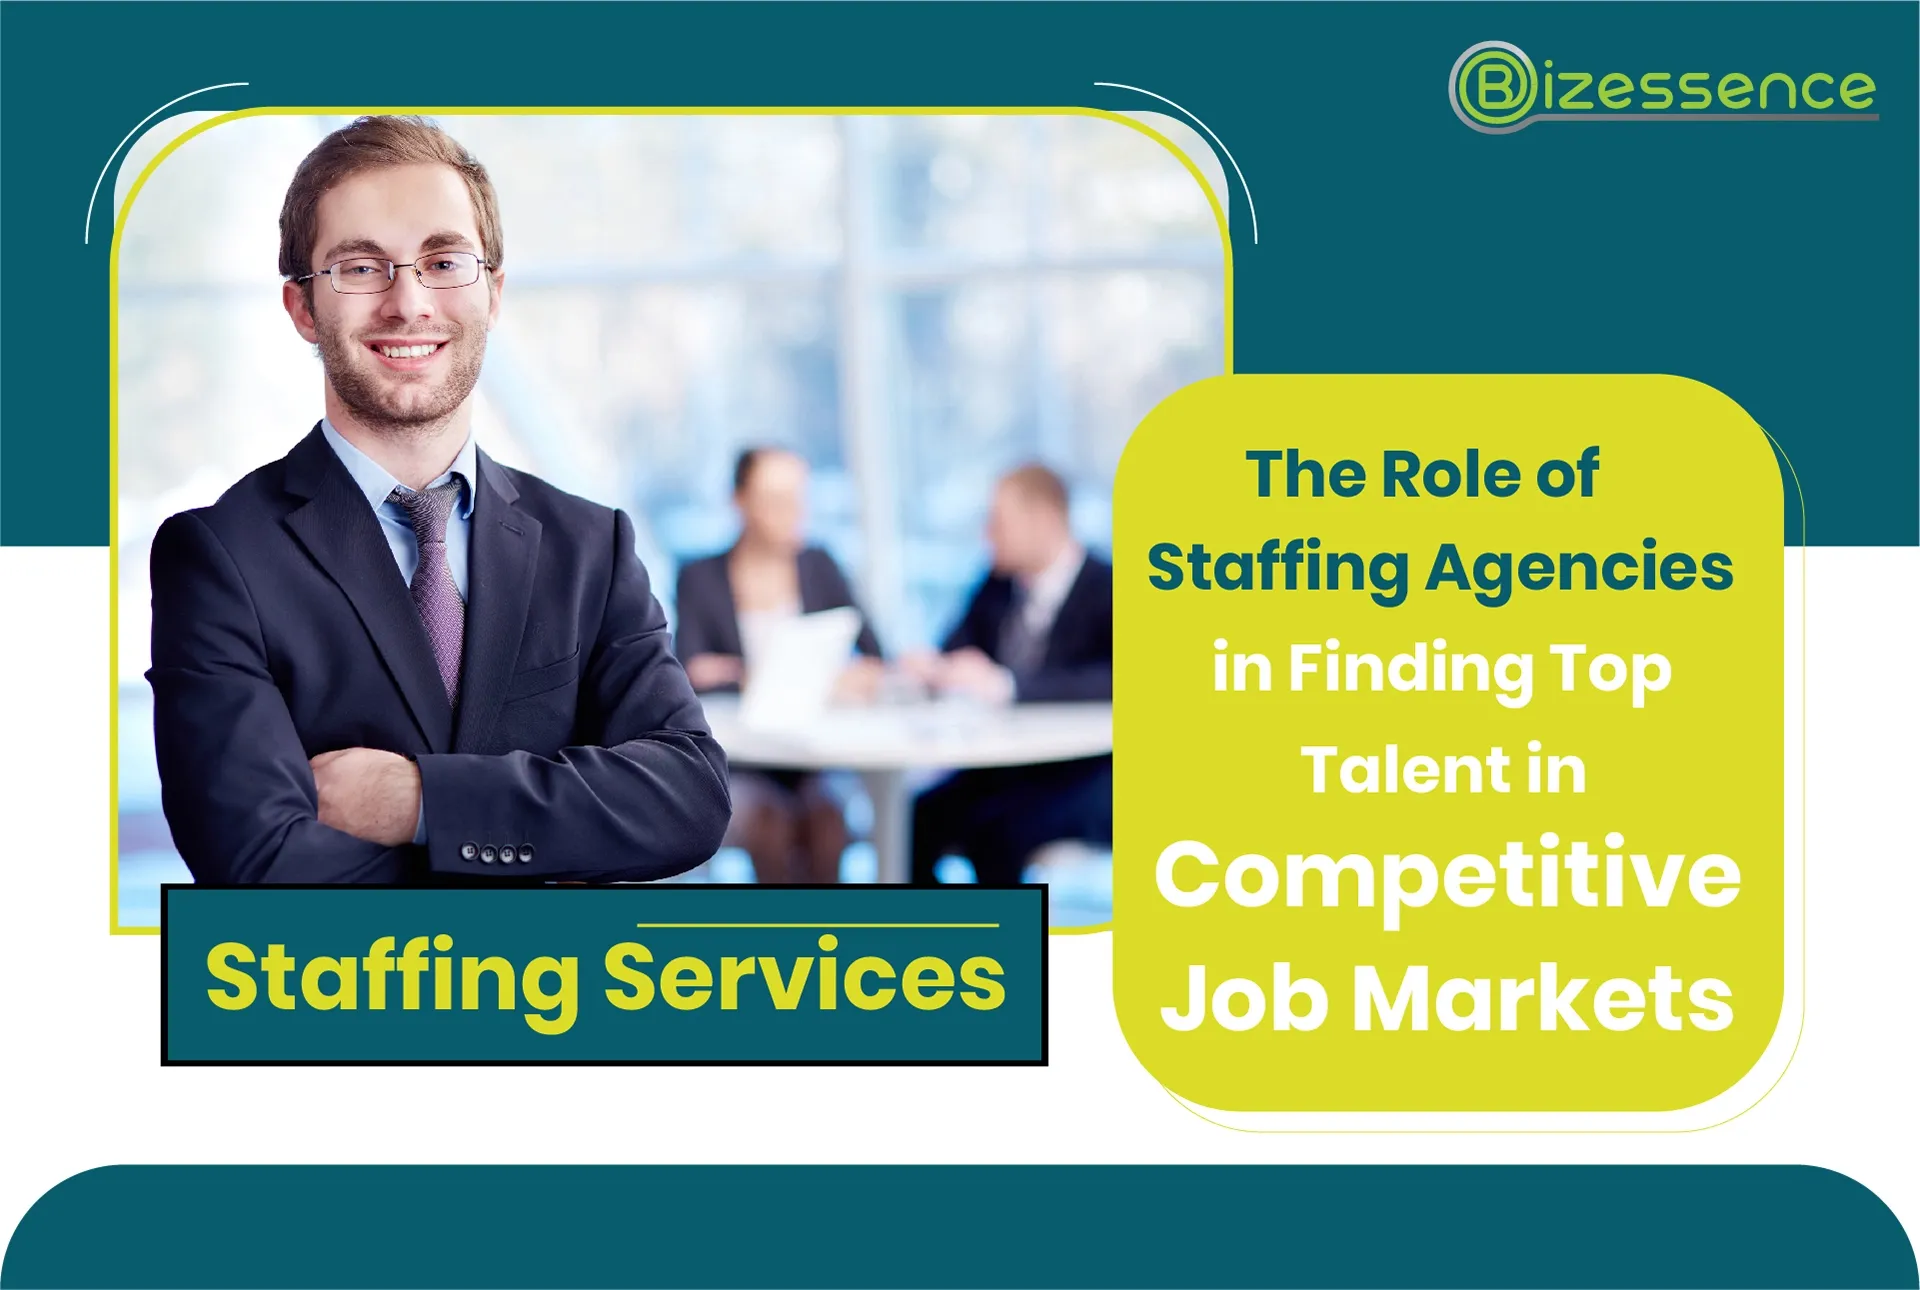 The Role of Staffing Agencies in Finding Top Talent in Competitive Job Markets